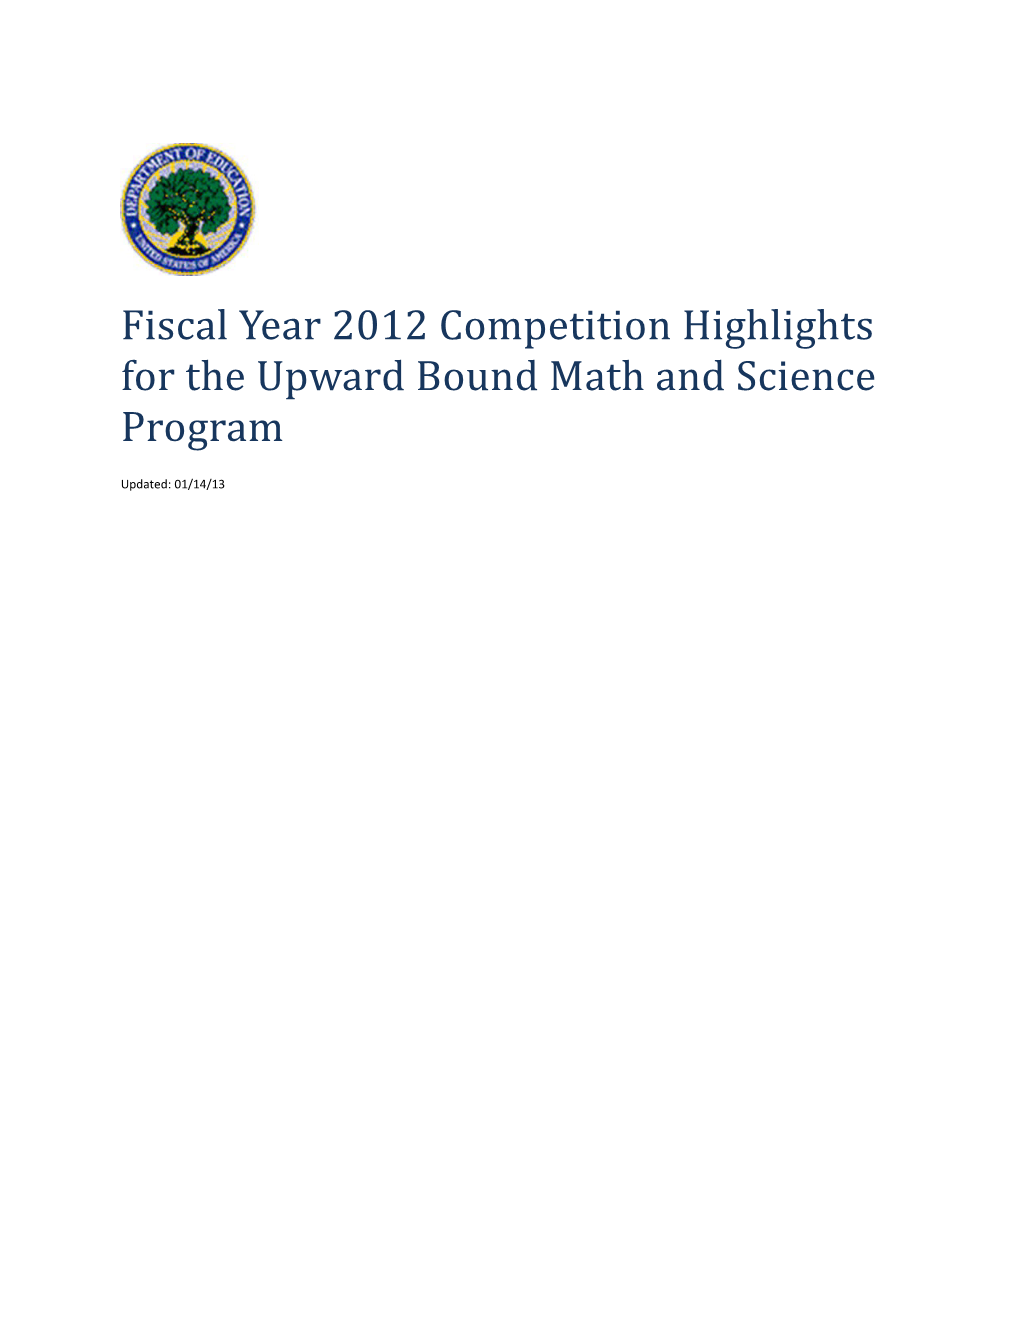 FY 2012 Competition Highlights for the Upward Bound Math and Science Program (MS Word)